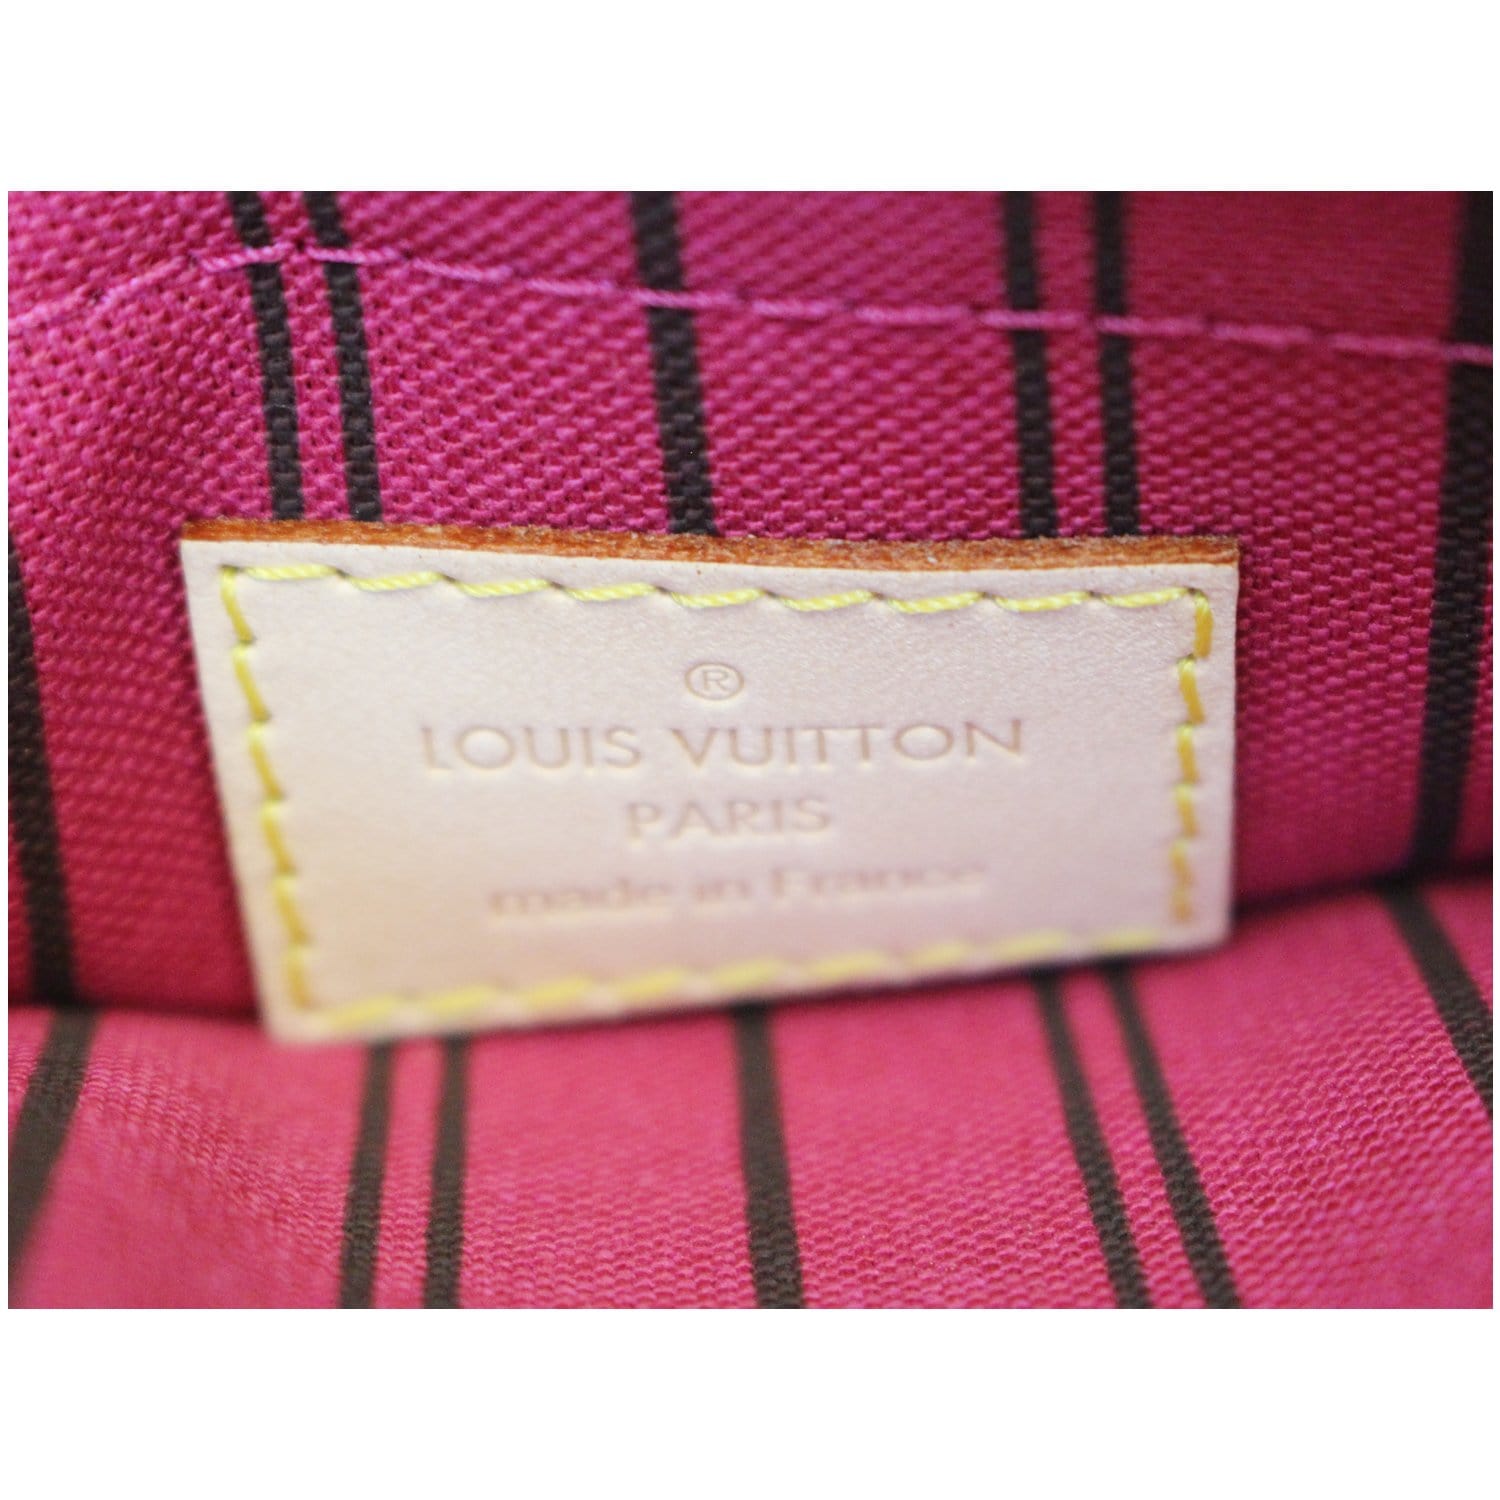 Louis Vuitton Purse With Pink Inside - 12 For Sale on 1stDibs  louis vuitton  pink inside, louis vuitton purse pink inside, louis vuitton wallet pink  inside